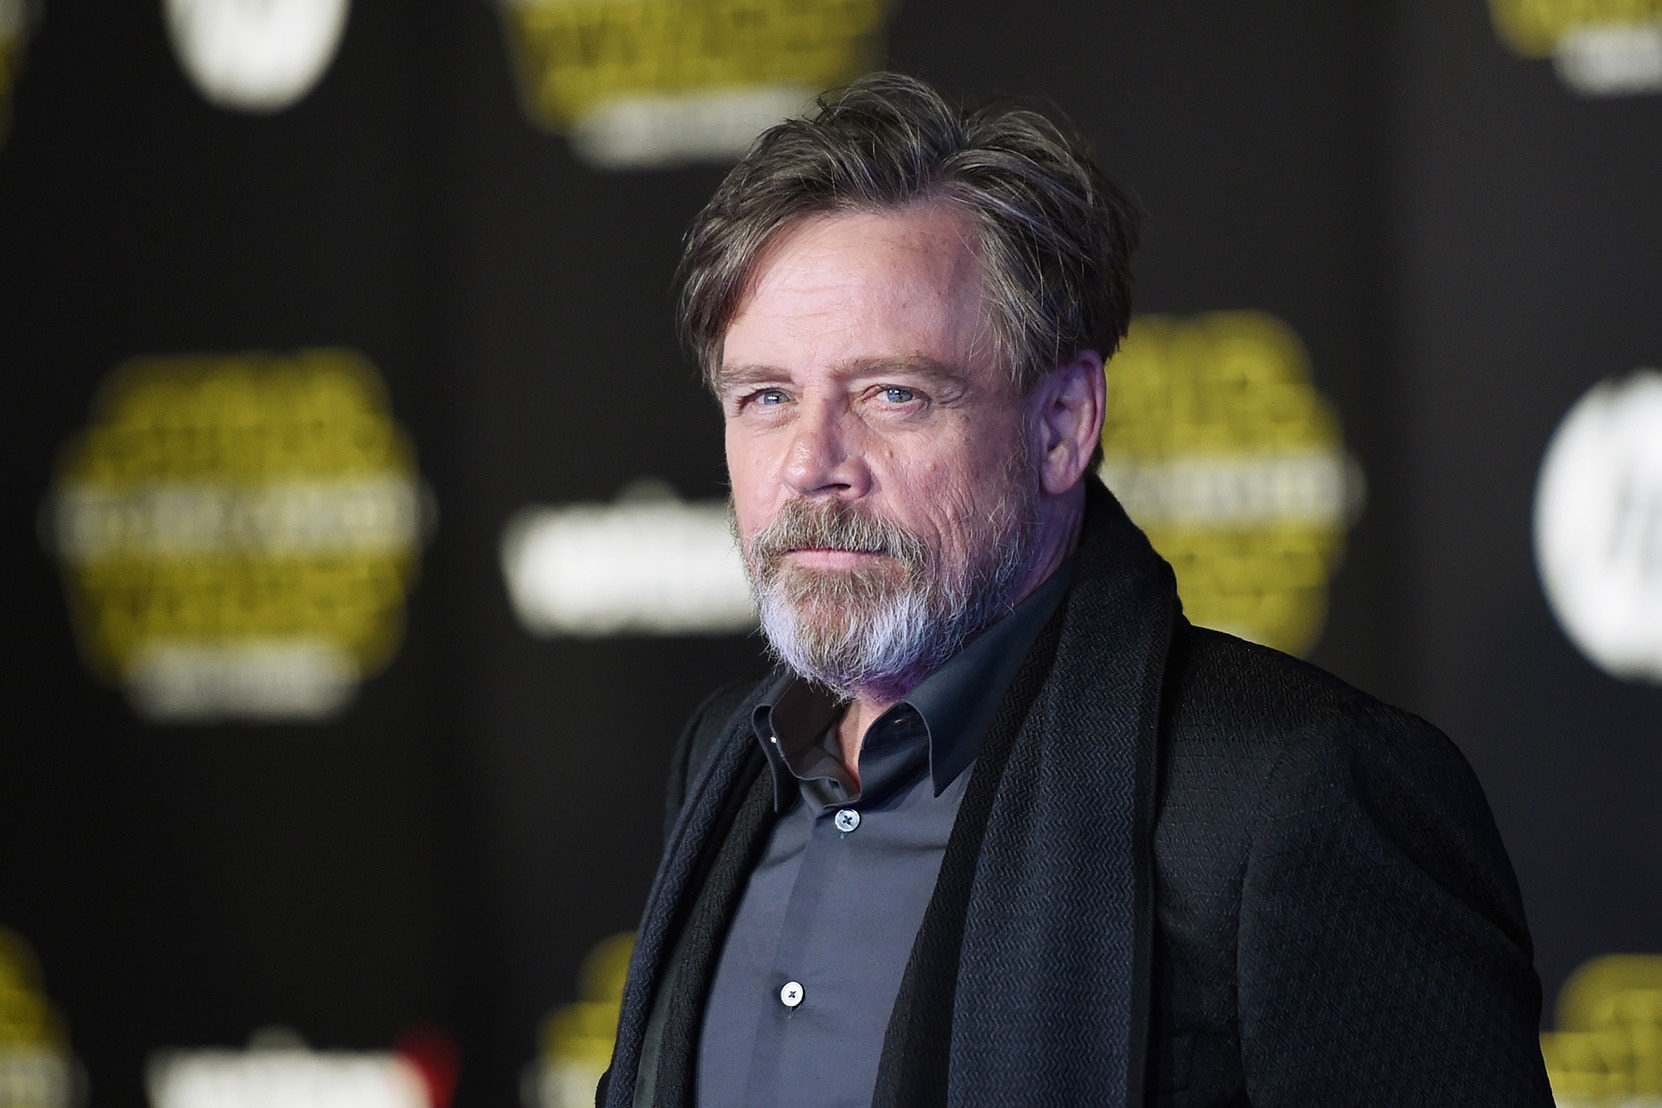 Mark Hamill Solo: A Star Wars Story Spoiler C-3PO R2-D2 Anthony Daniels Cast Character Every Single Film Movie Release Information Premiere Luke Skywalker Donald Glover